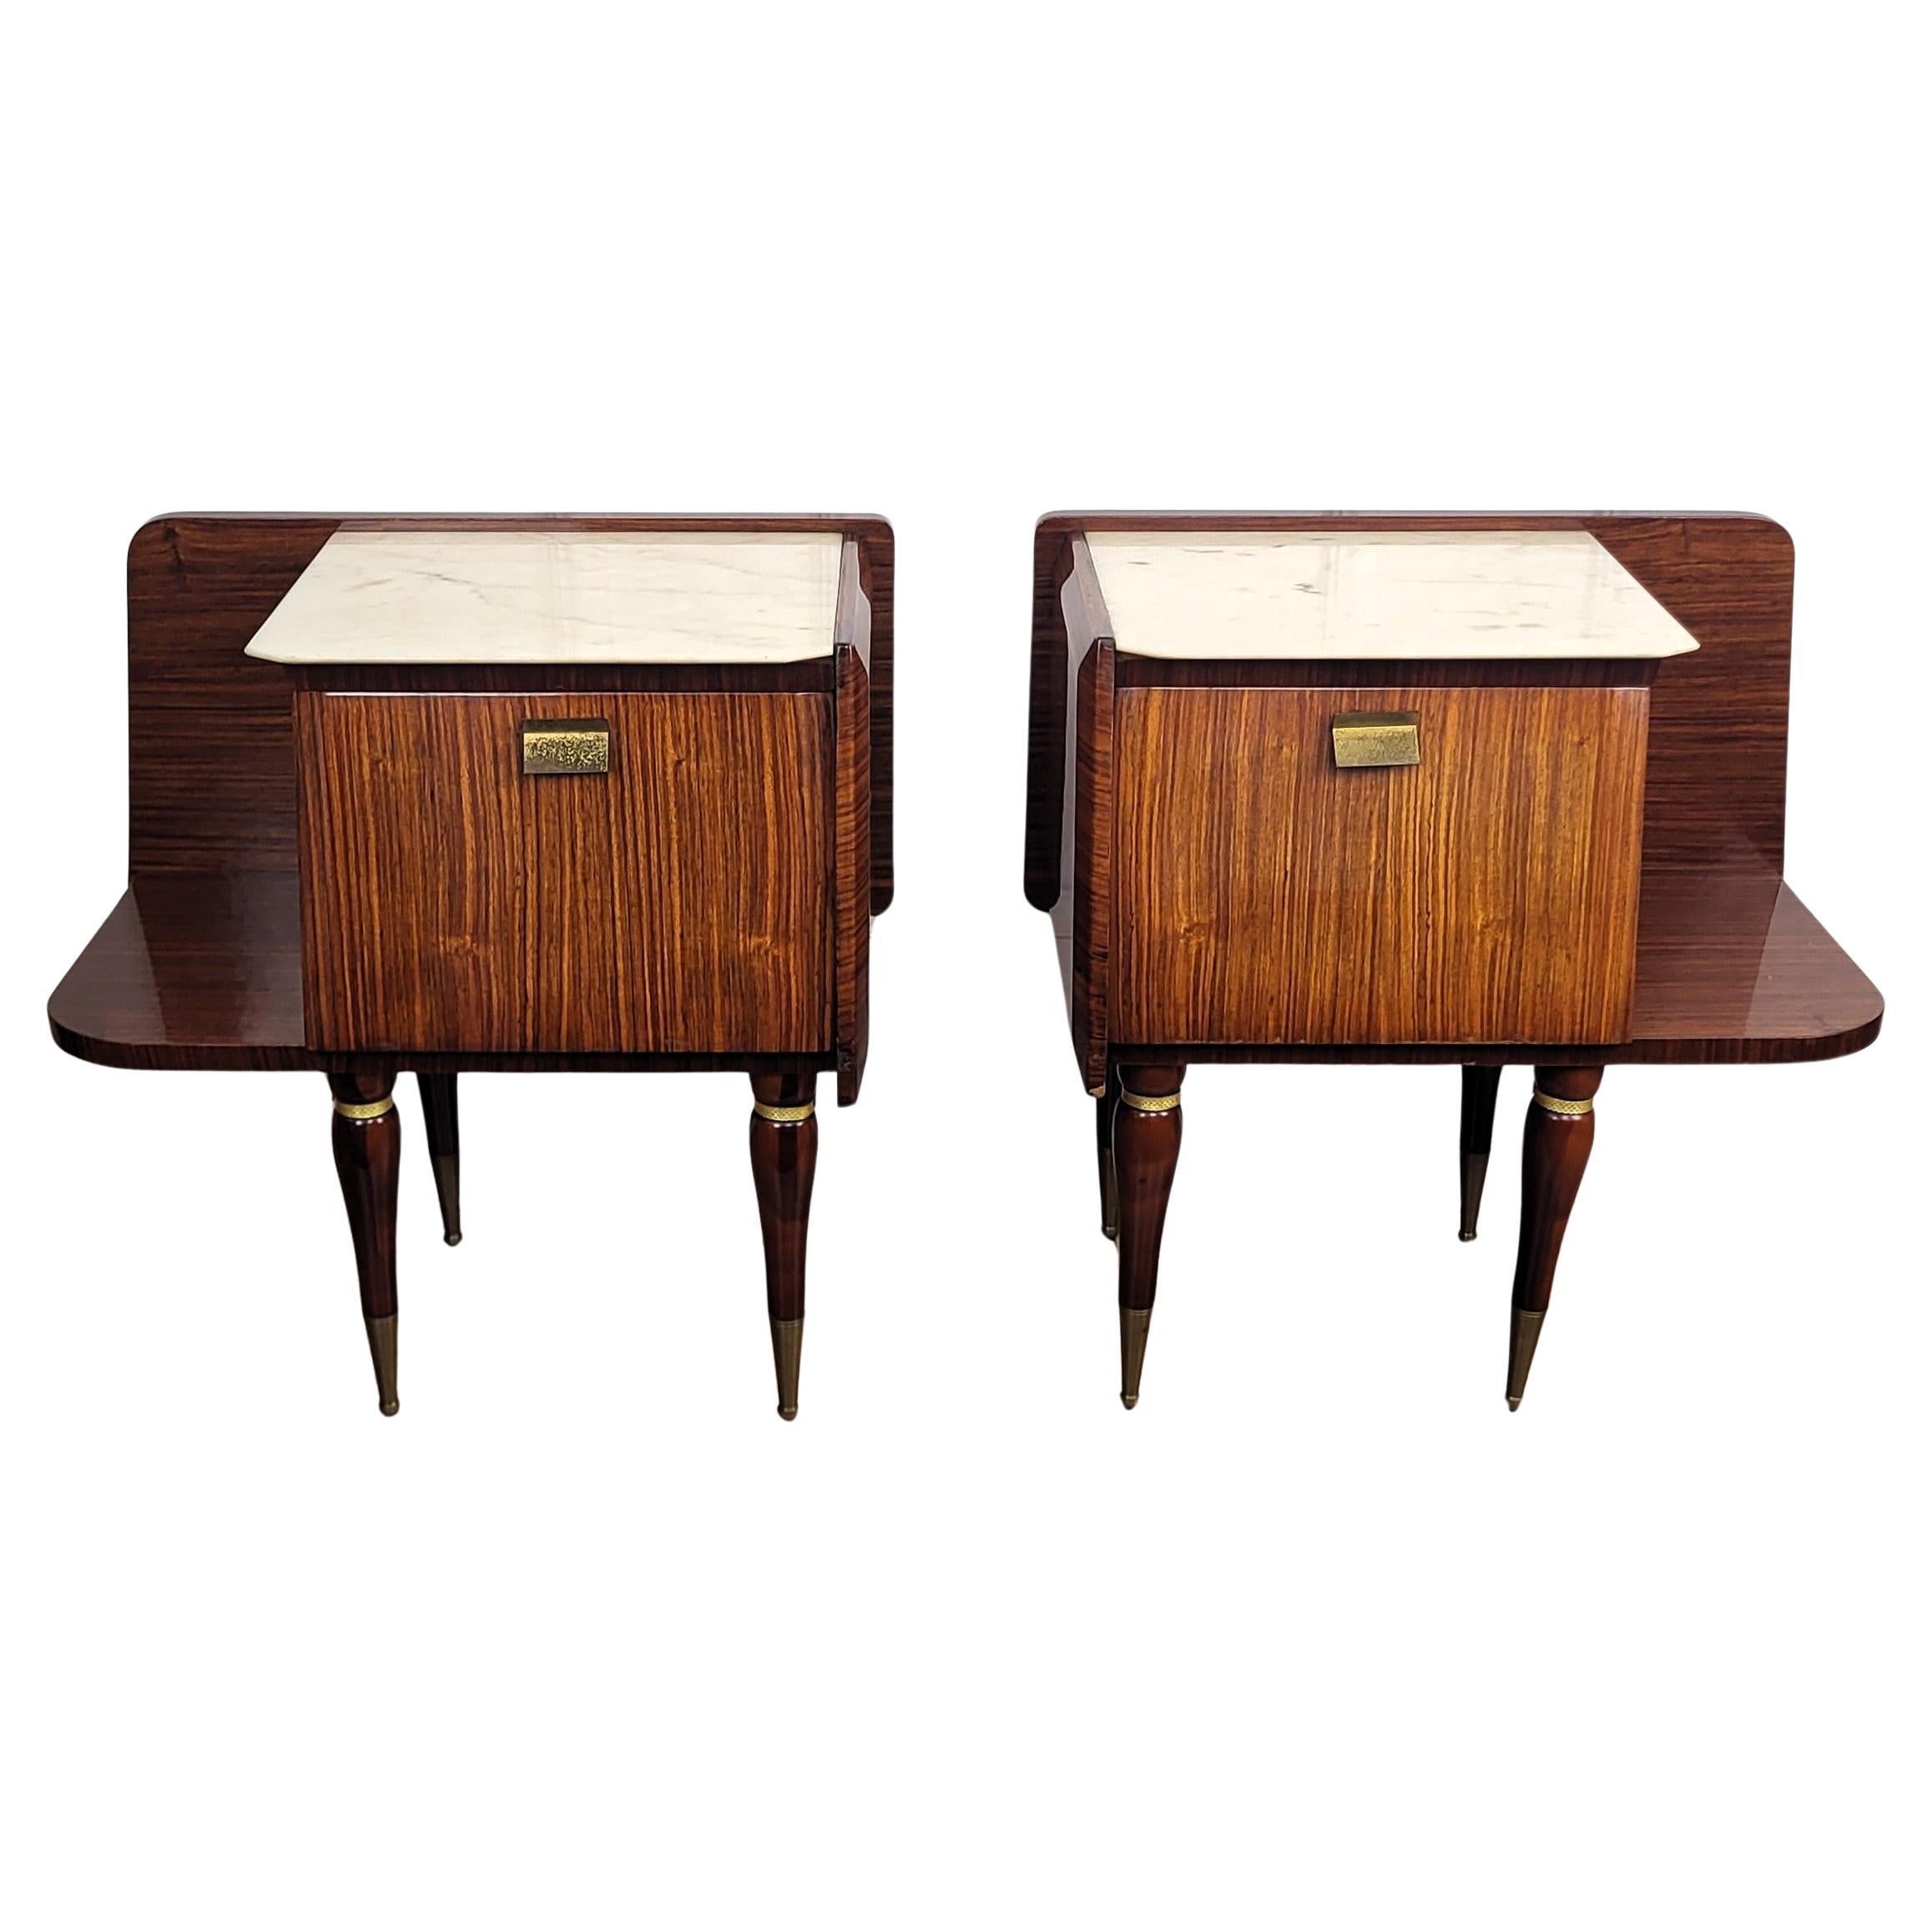 Pair of Italian Mid-Century Modern Night Stands Bedside Tables Wood & Marble Top For Sale